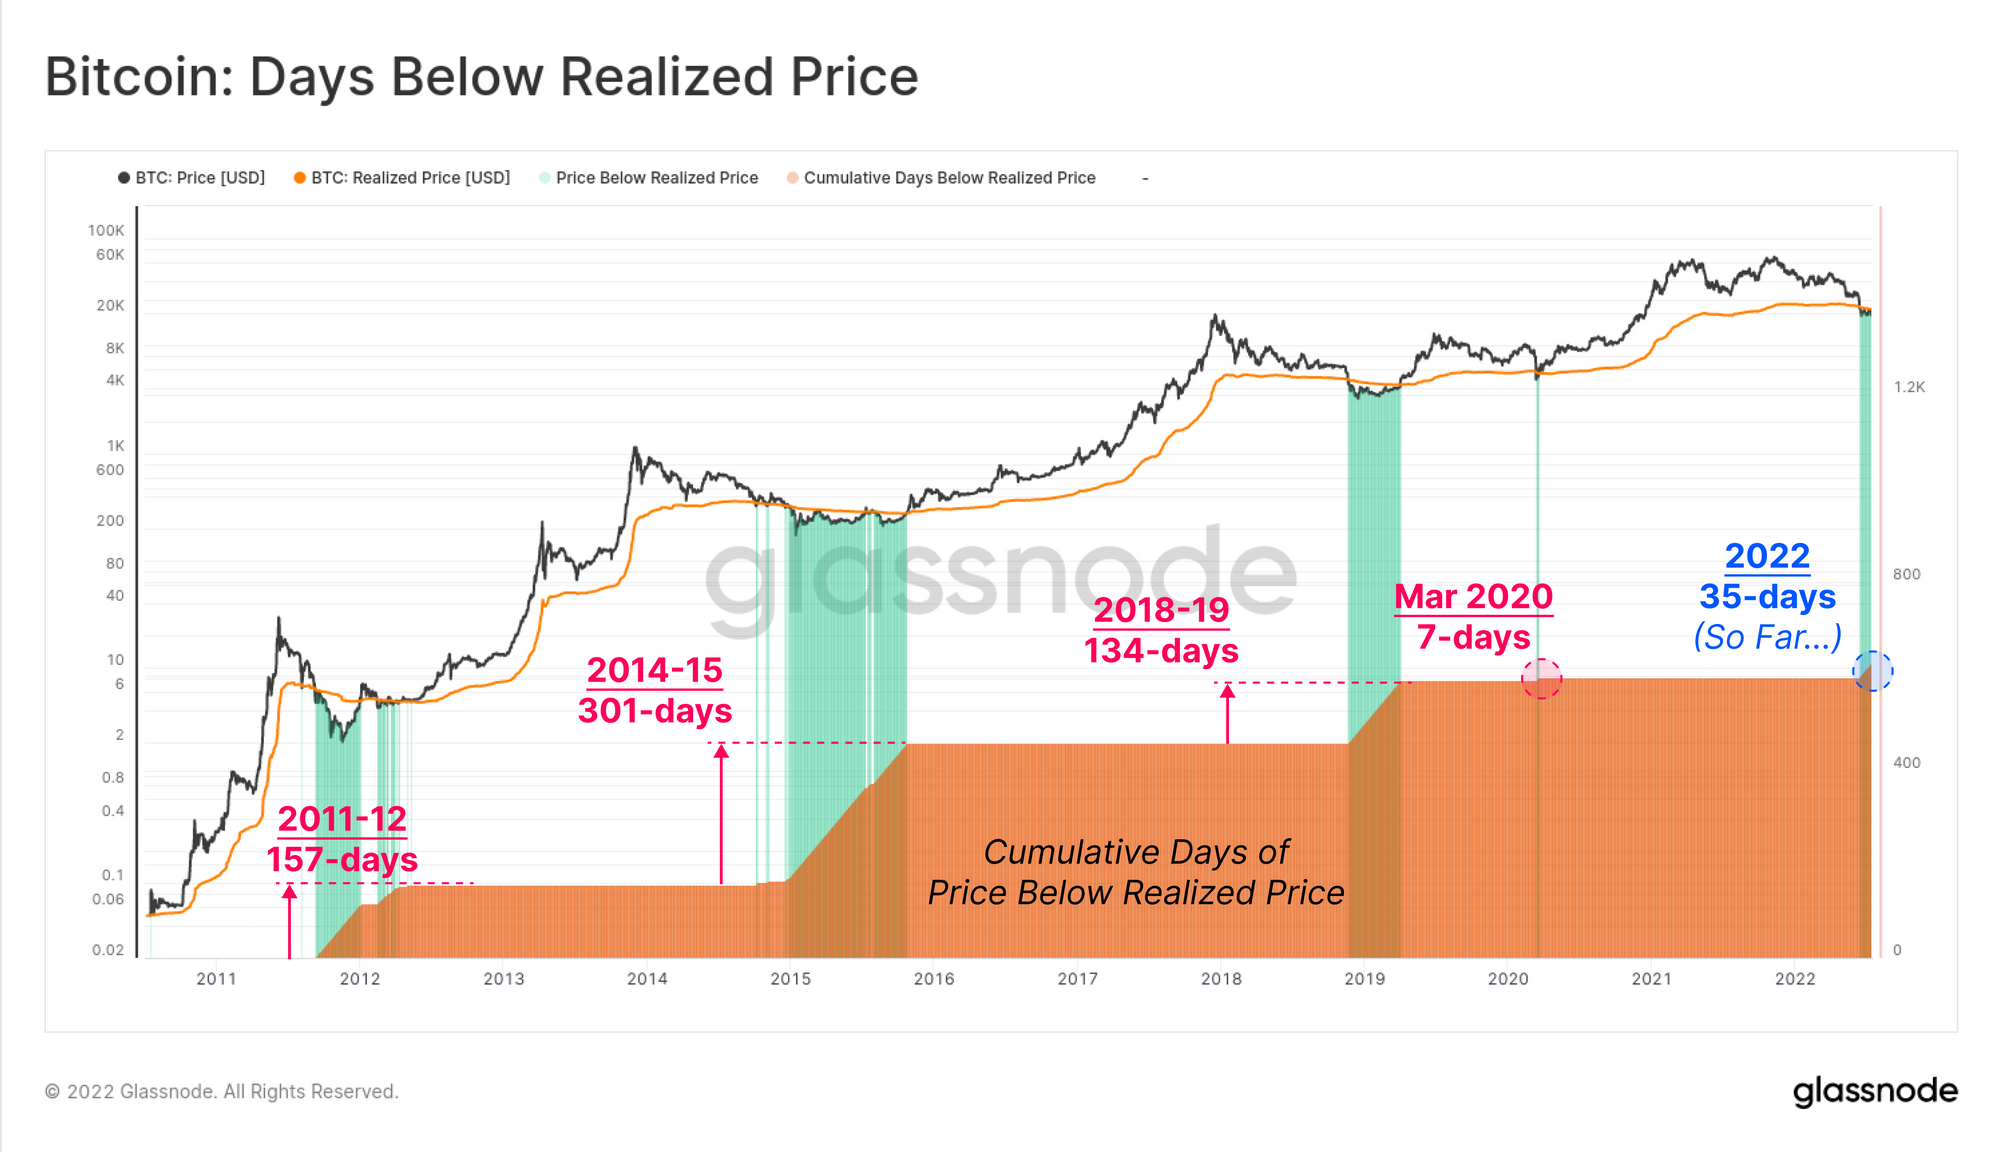 Trading Below The Realized Price